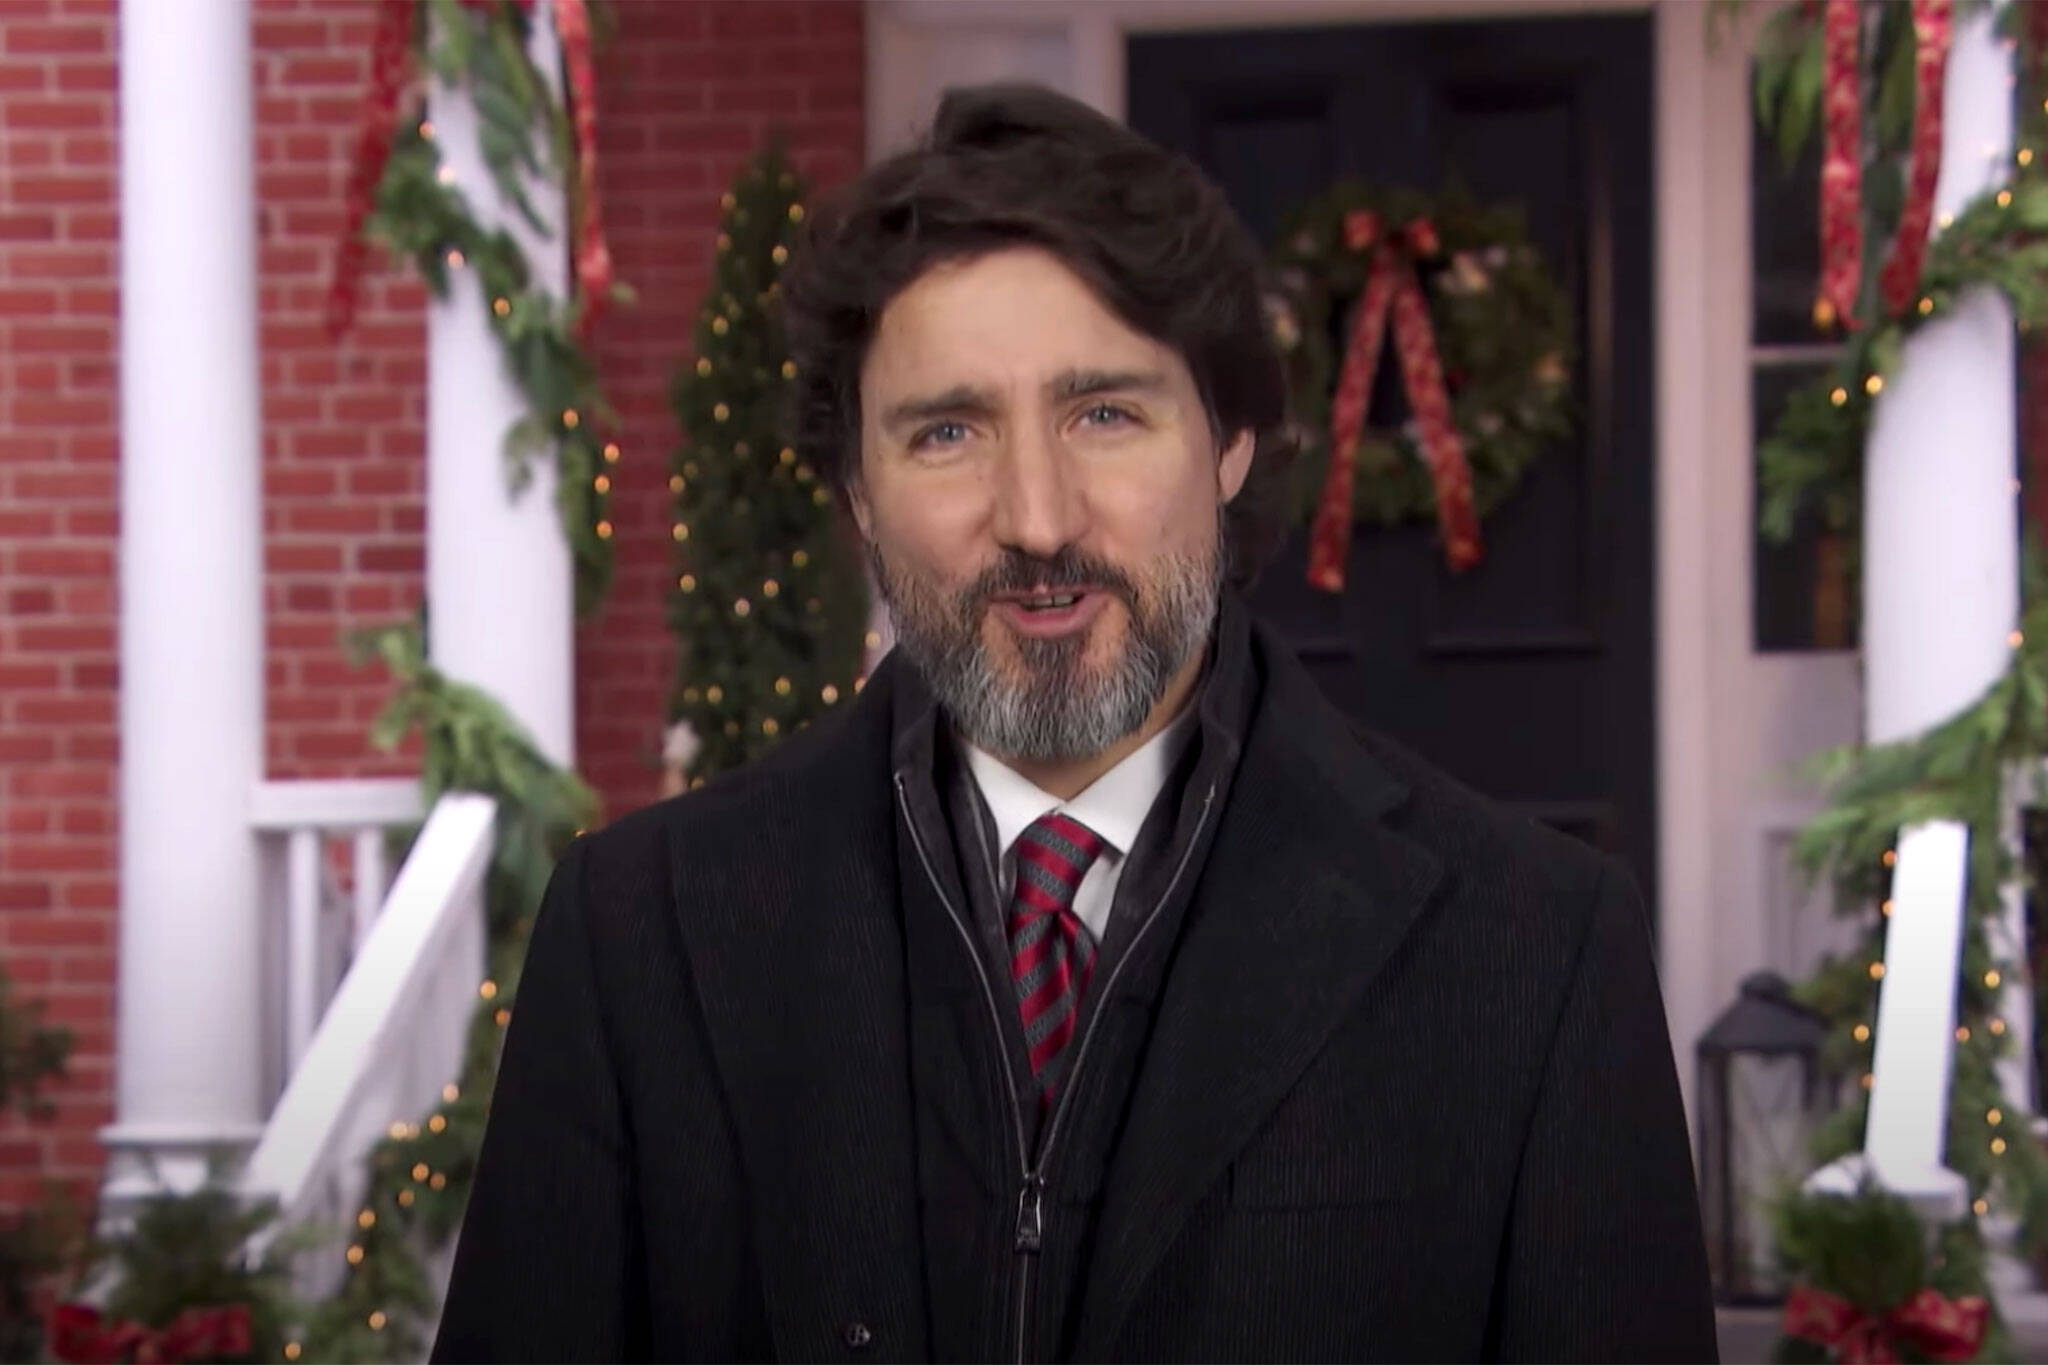 Here's what Justin Trudeau said in his Christmas message to Canada